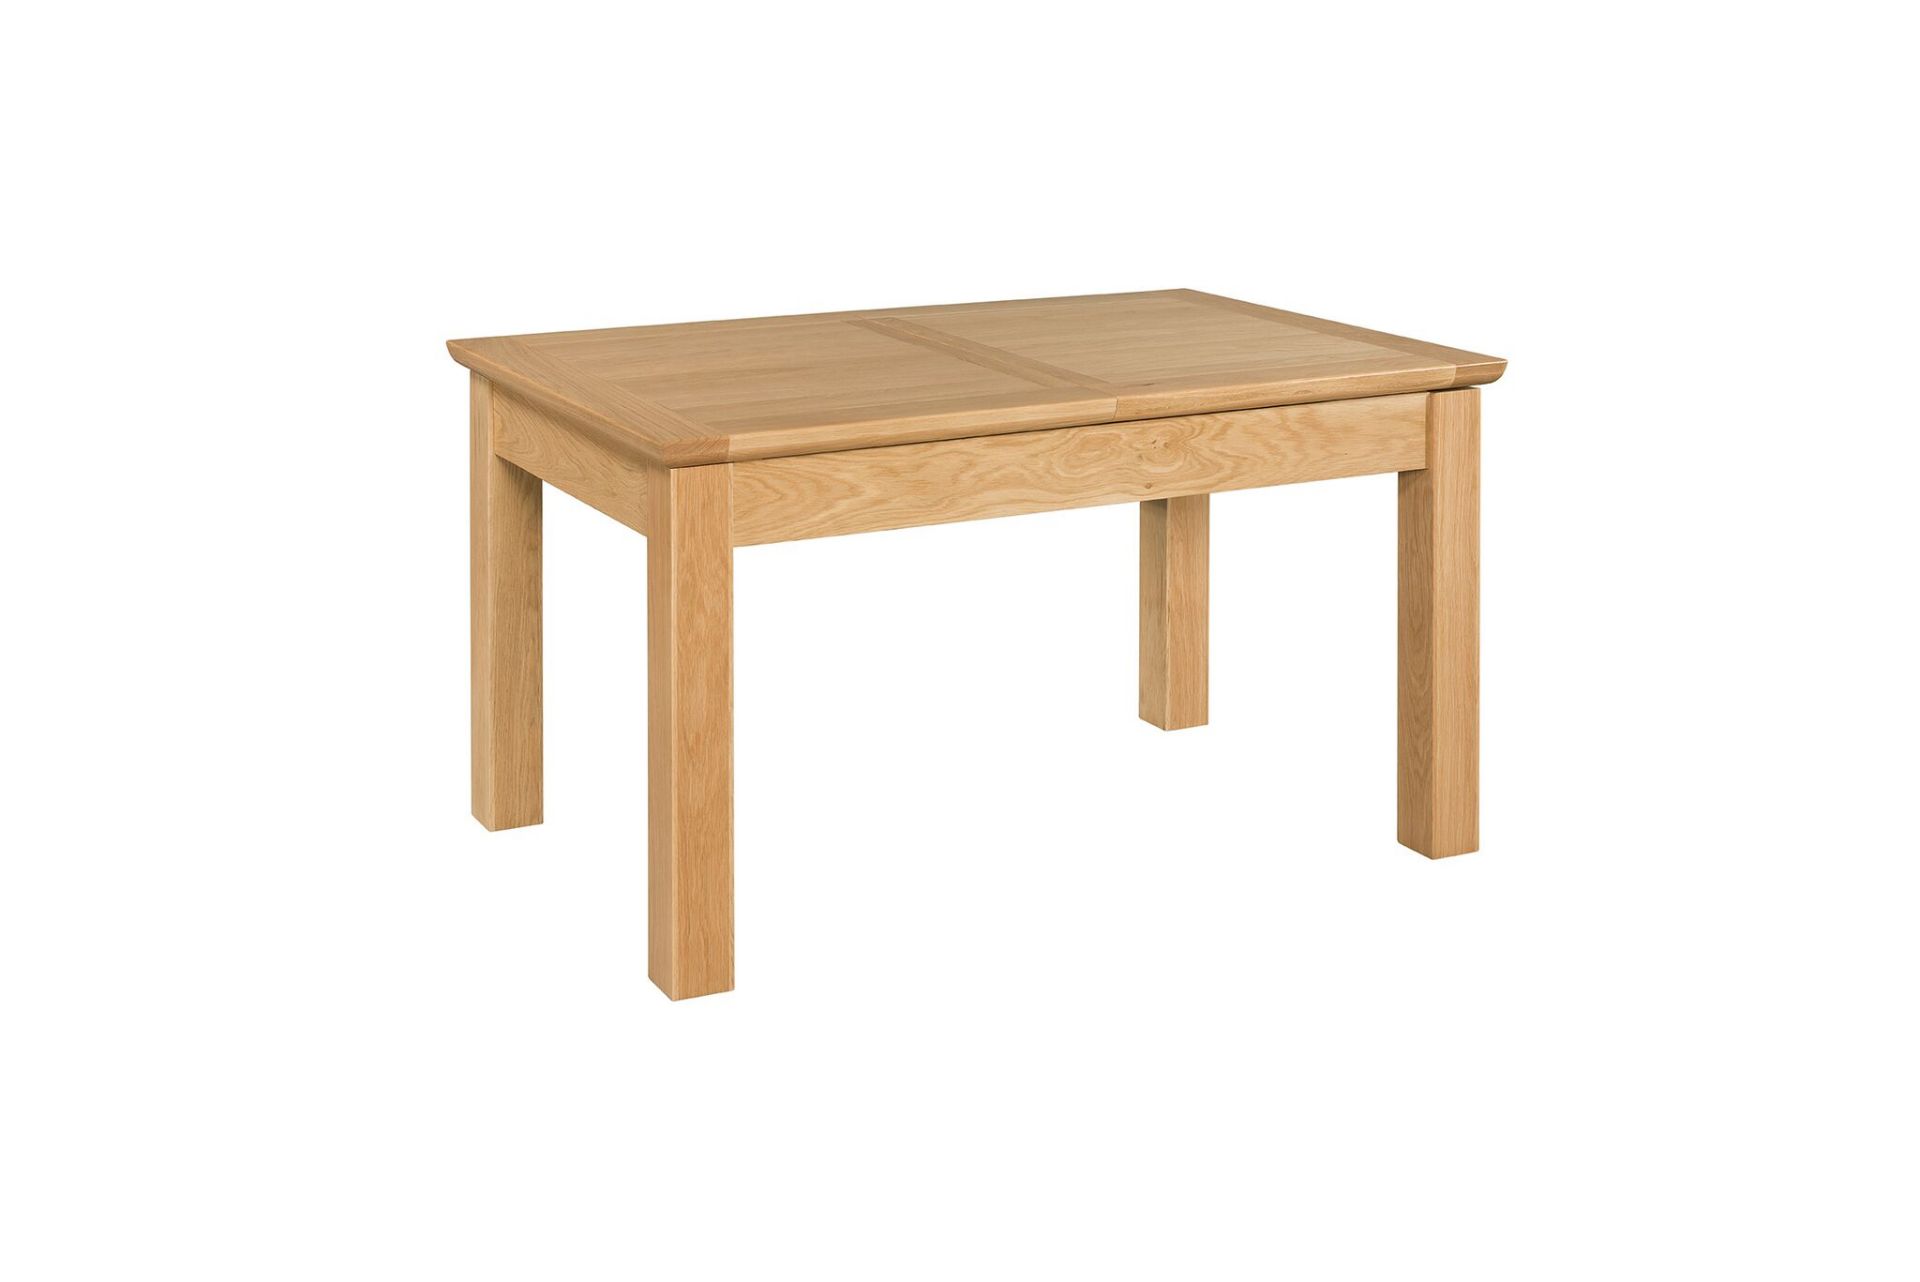 V Brand New Siena 120 x 80 Butterfly Extension Table (extends to 160 cm) 1200-160 x 800 x 760 cms